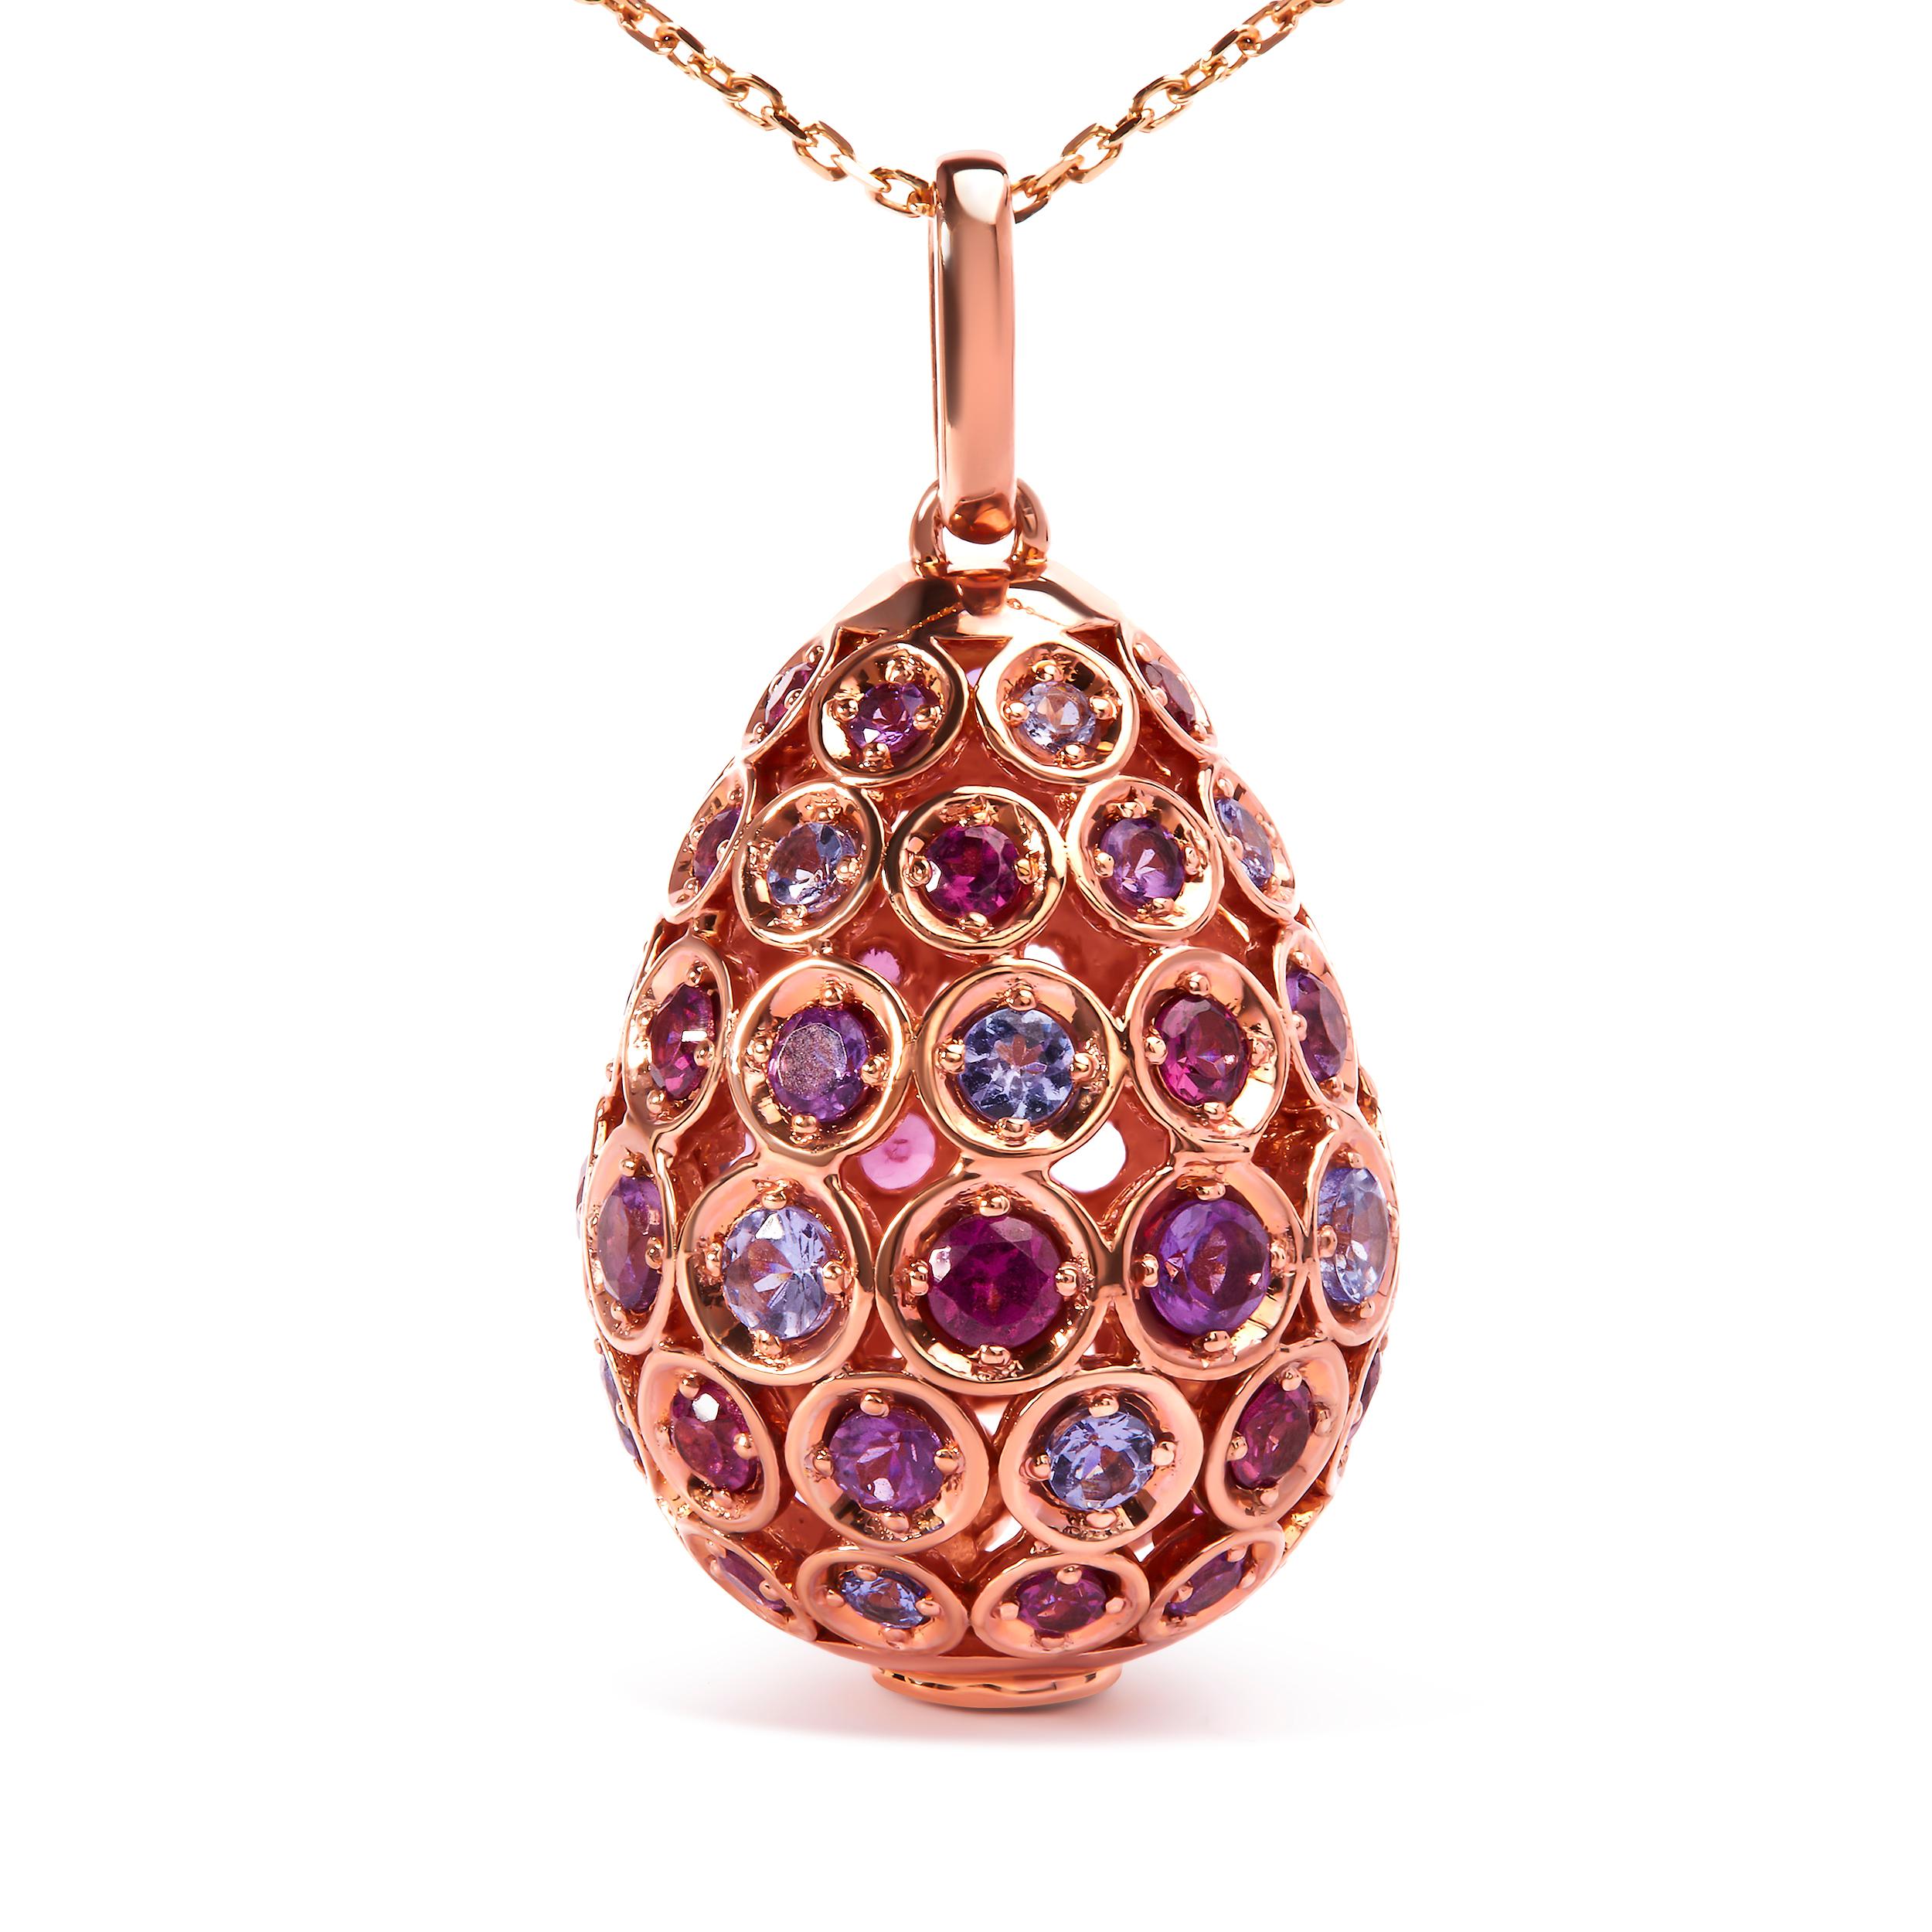 Introducing a captivating masterpiece that will leave you spellbound. This exquisite pendant necklace features a mesmerizing array of rainbow-colored gemstones, delicately shaped like an elegant egg. Crafted with love from 10K rose gold plated .925